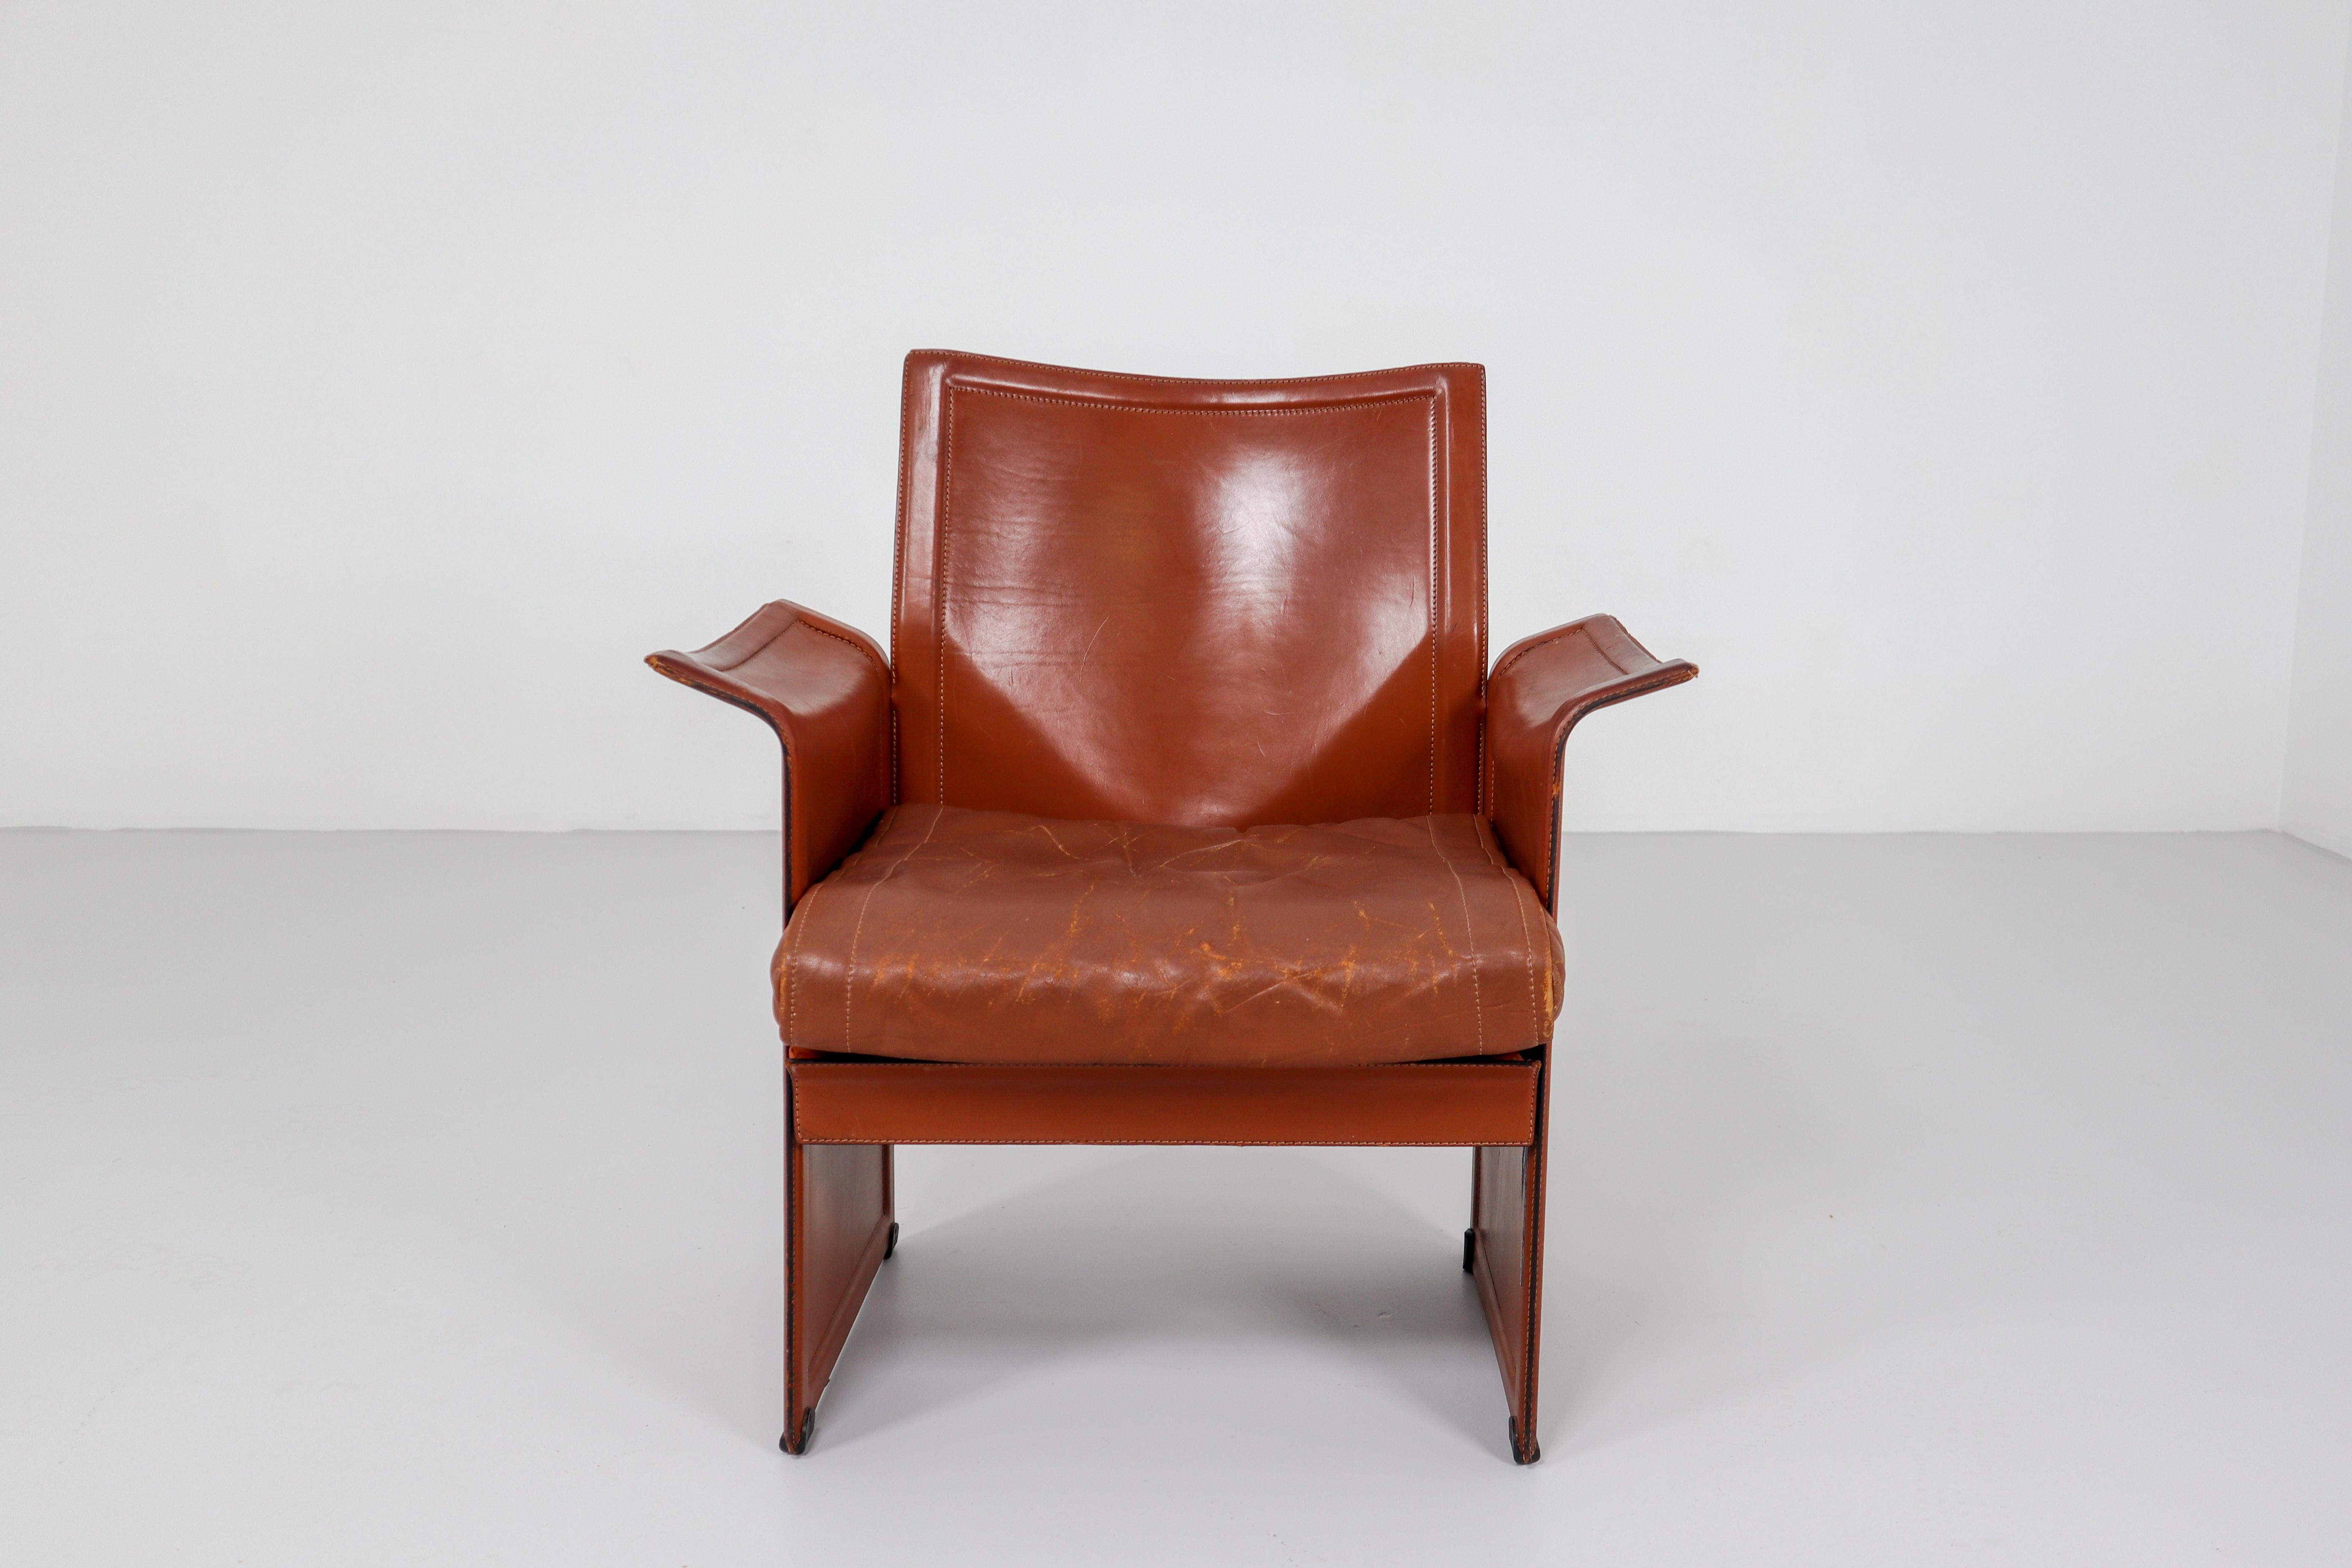 Tito Agnoli for Matteo Grassi, set of five Korium chairs, patinated cognac leather and metal, Italy, 1970s

These sophisticated iconic Korium patinated cognac leather chairs were designed by Tito Agnoli for Matteo Grassi. It features a strong